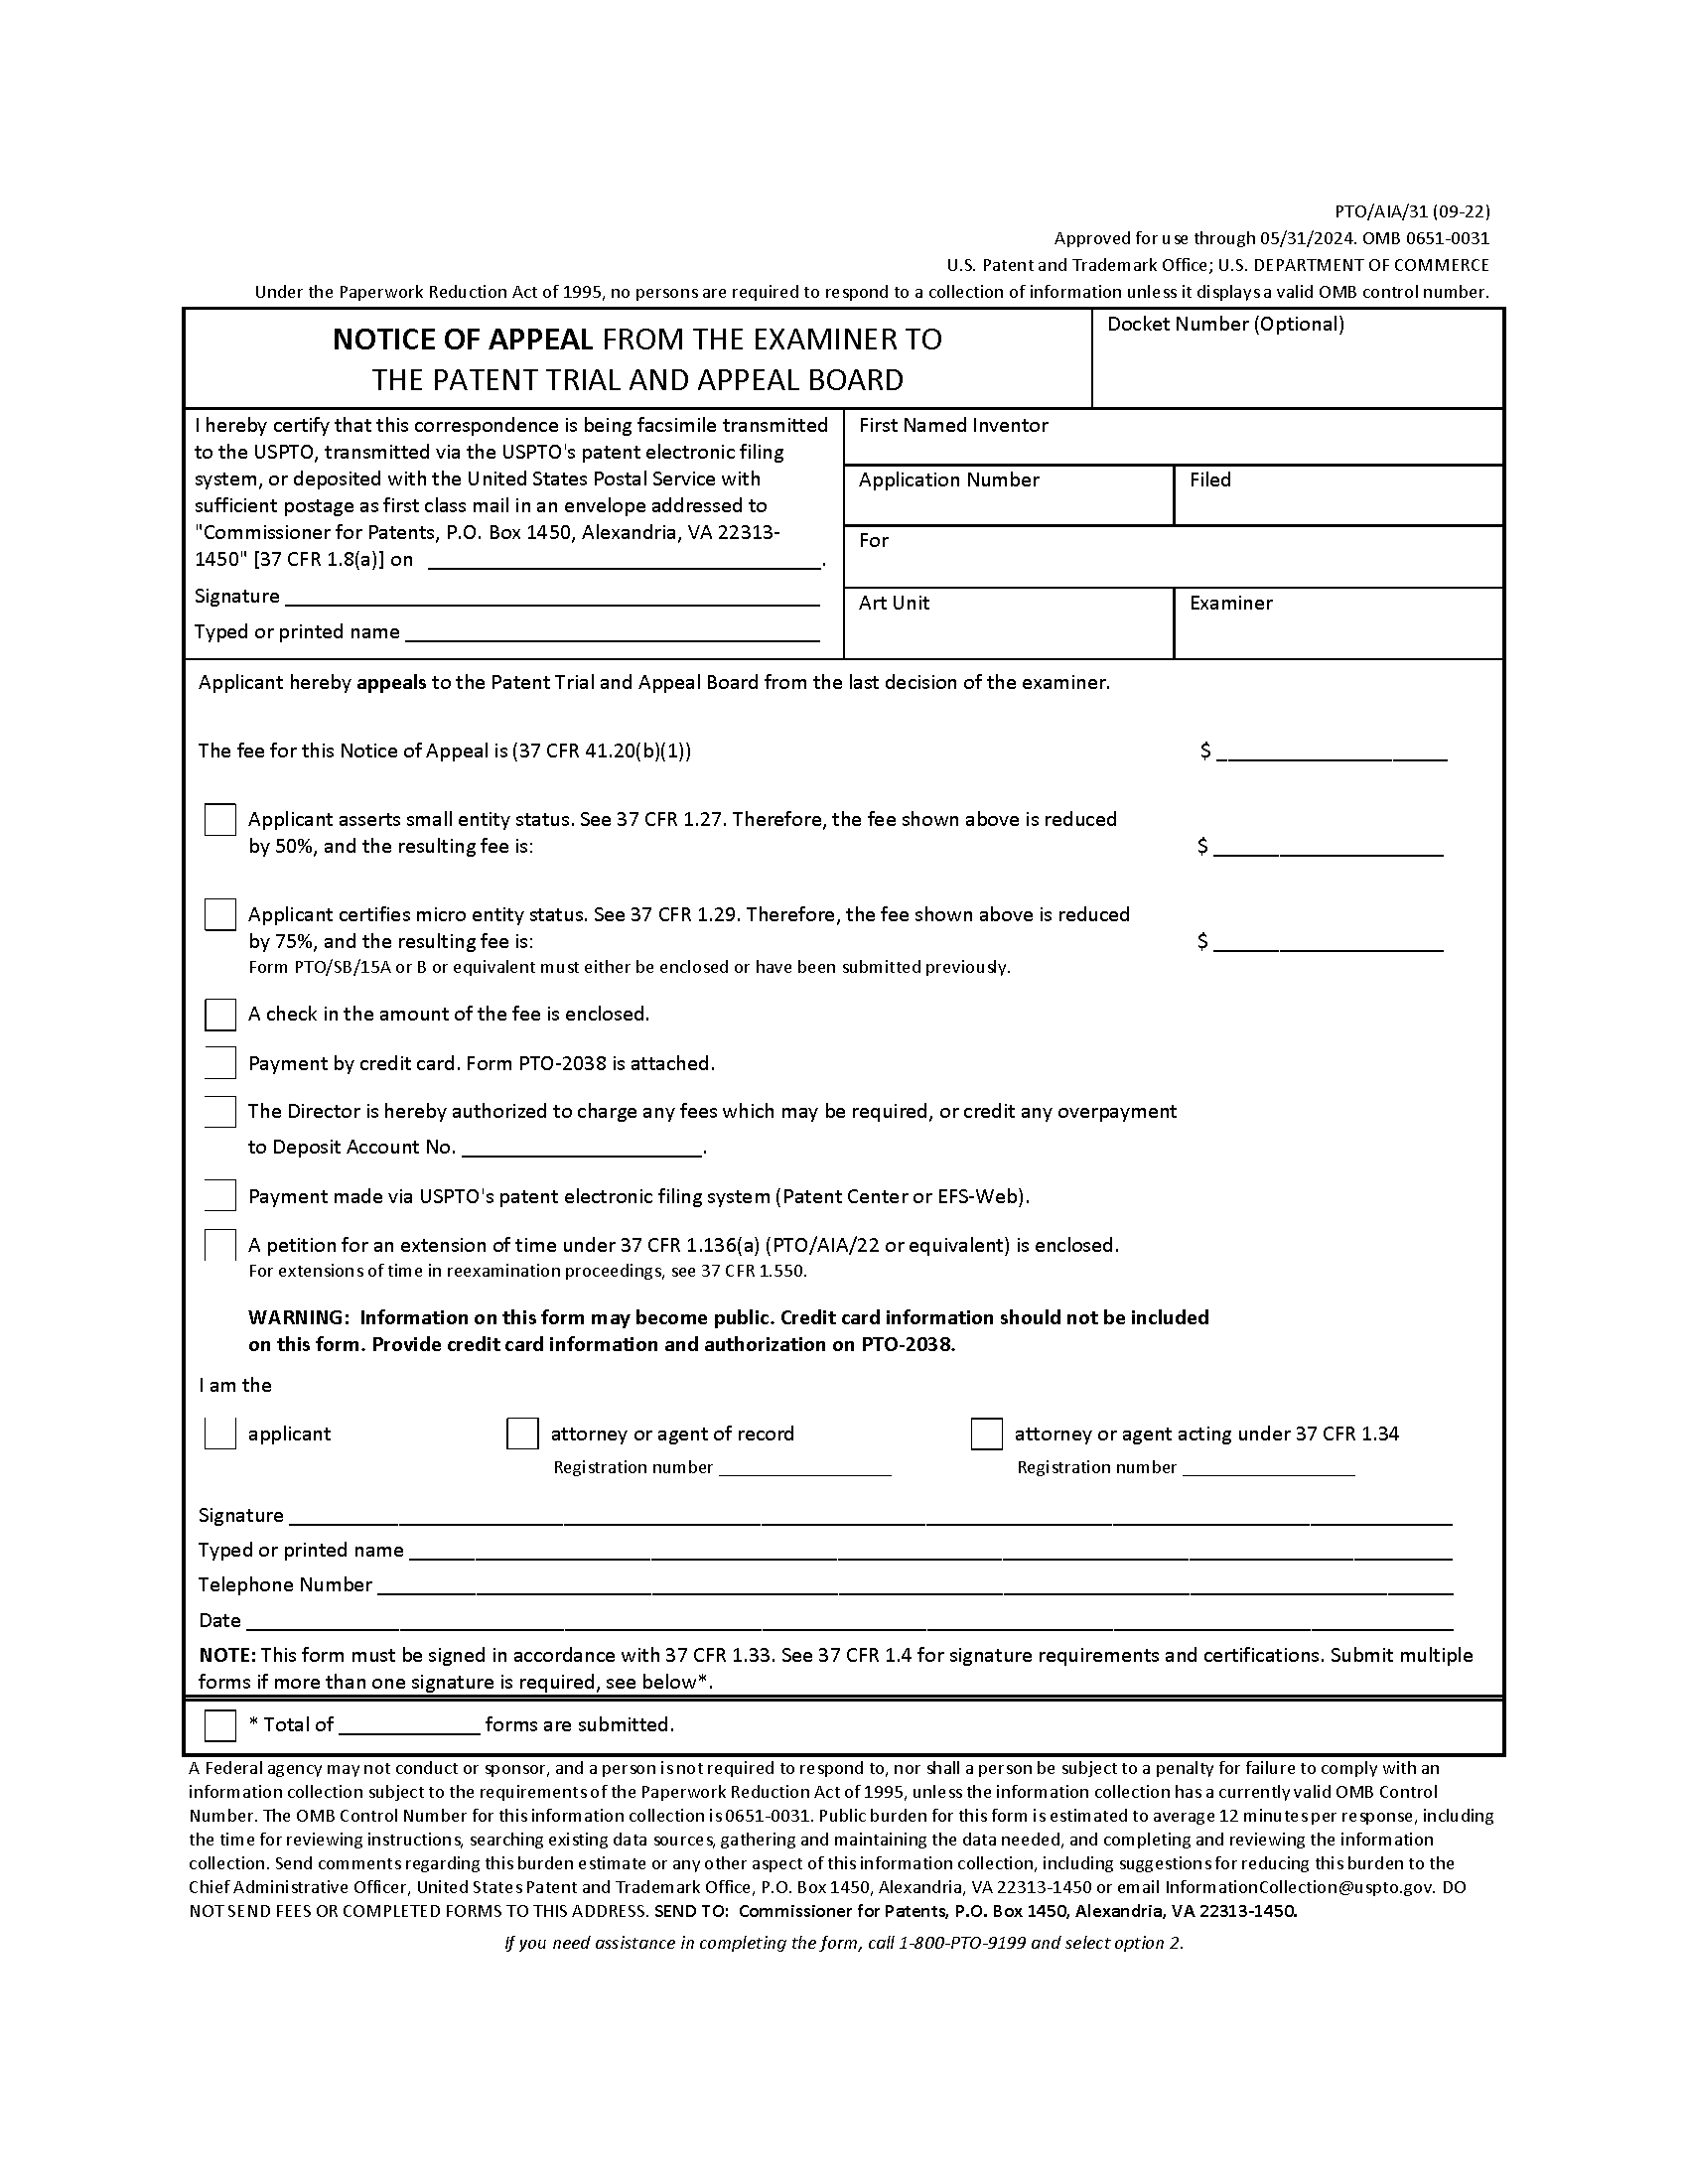 Form PTO/SB/31 Notice of Appeal from the Examiner